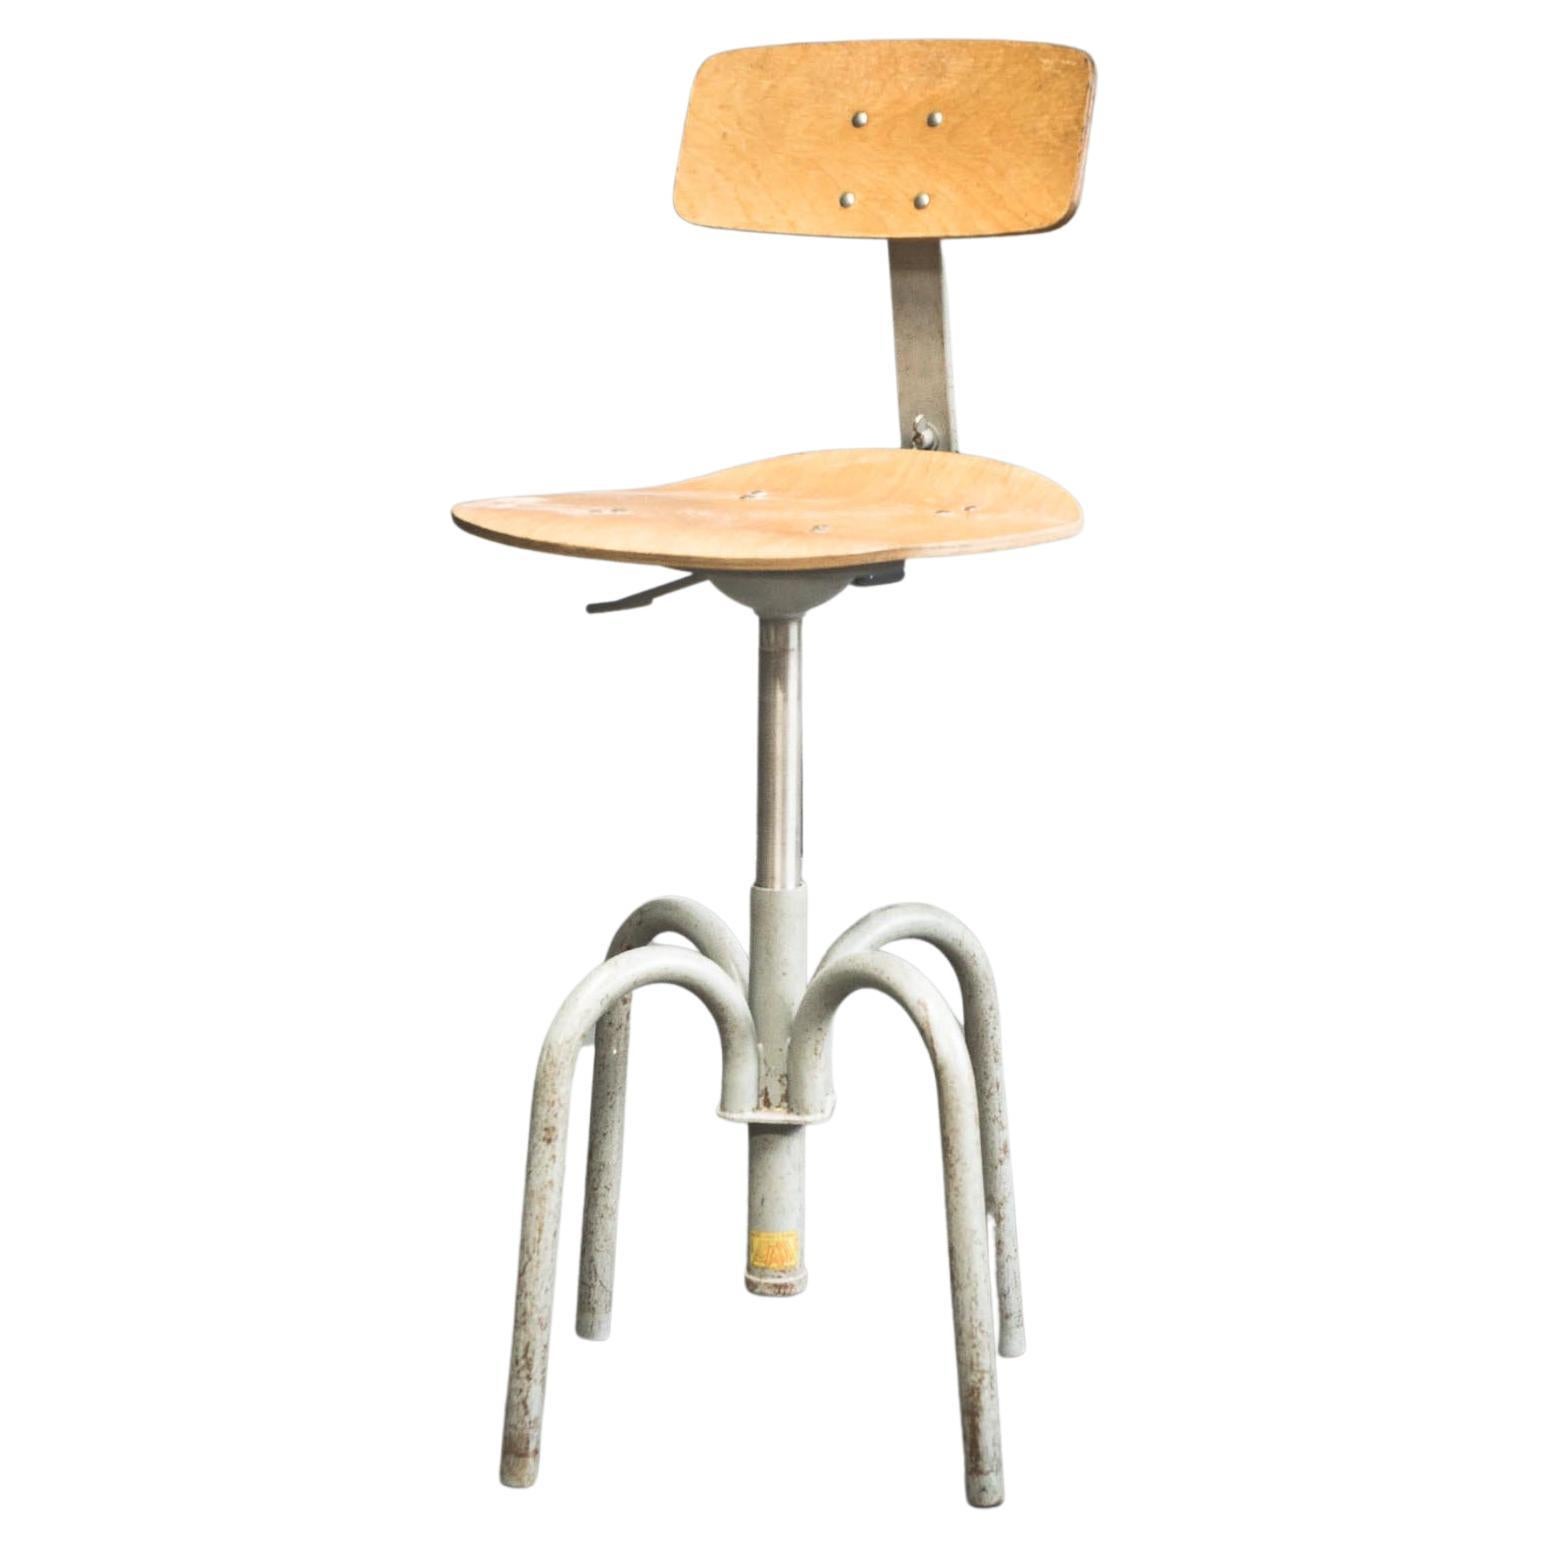 B.A.O. Industrial Architect's Stool For Sale